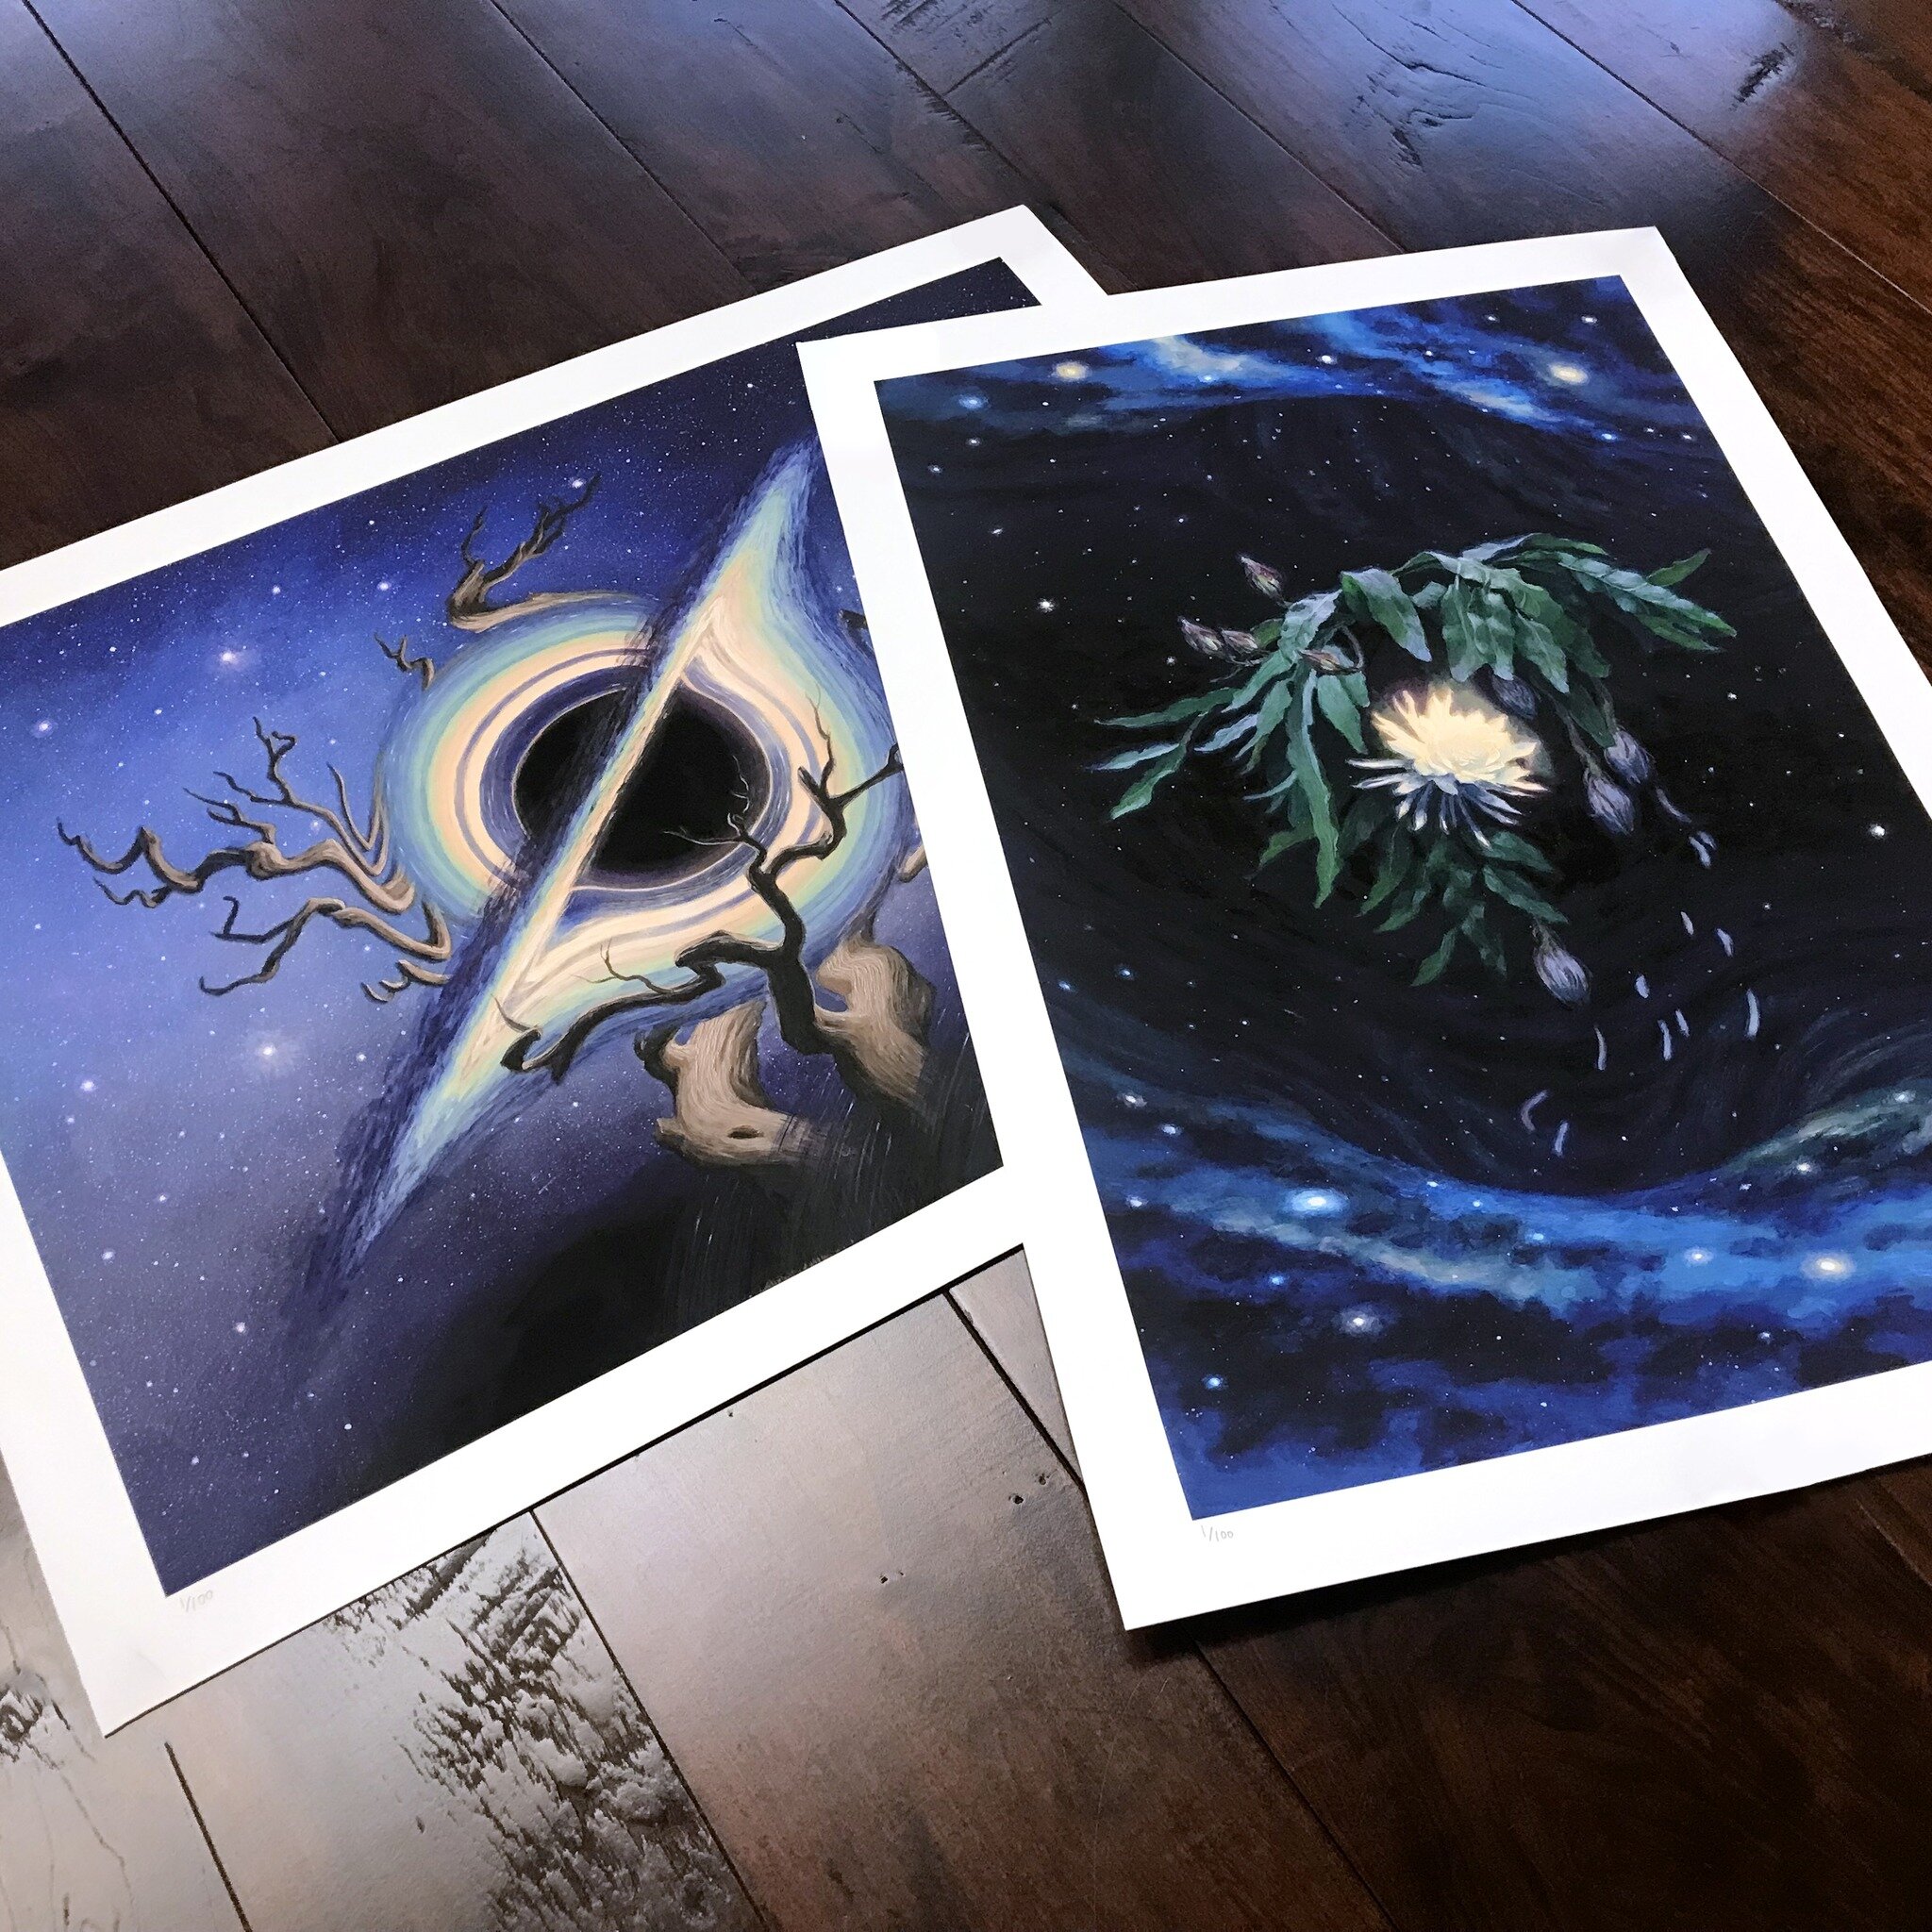 These star-studded prints left the studio this morning! 

Curvature (2022) 
&amp; 
For a Moment (2022)

Things are slowing down already with both shipping and my printer, so if you'd like your print to arrive before the holidays, I suggest hitting up